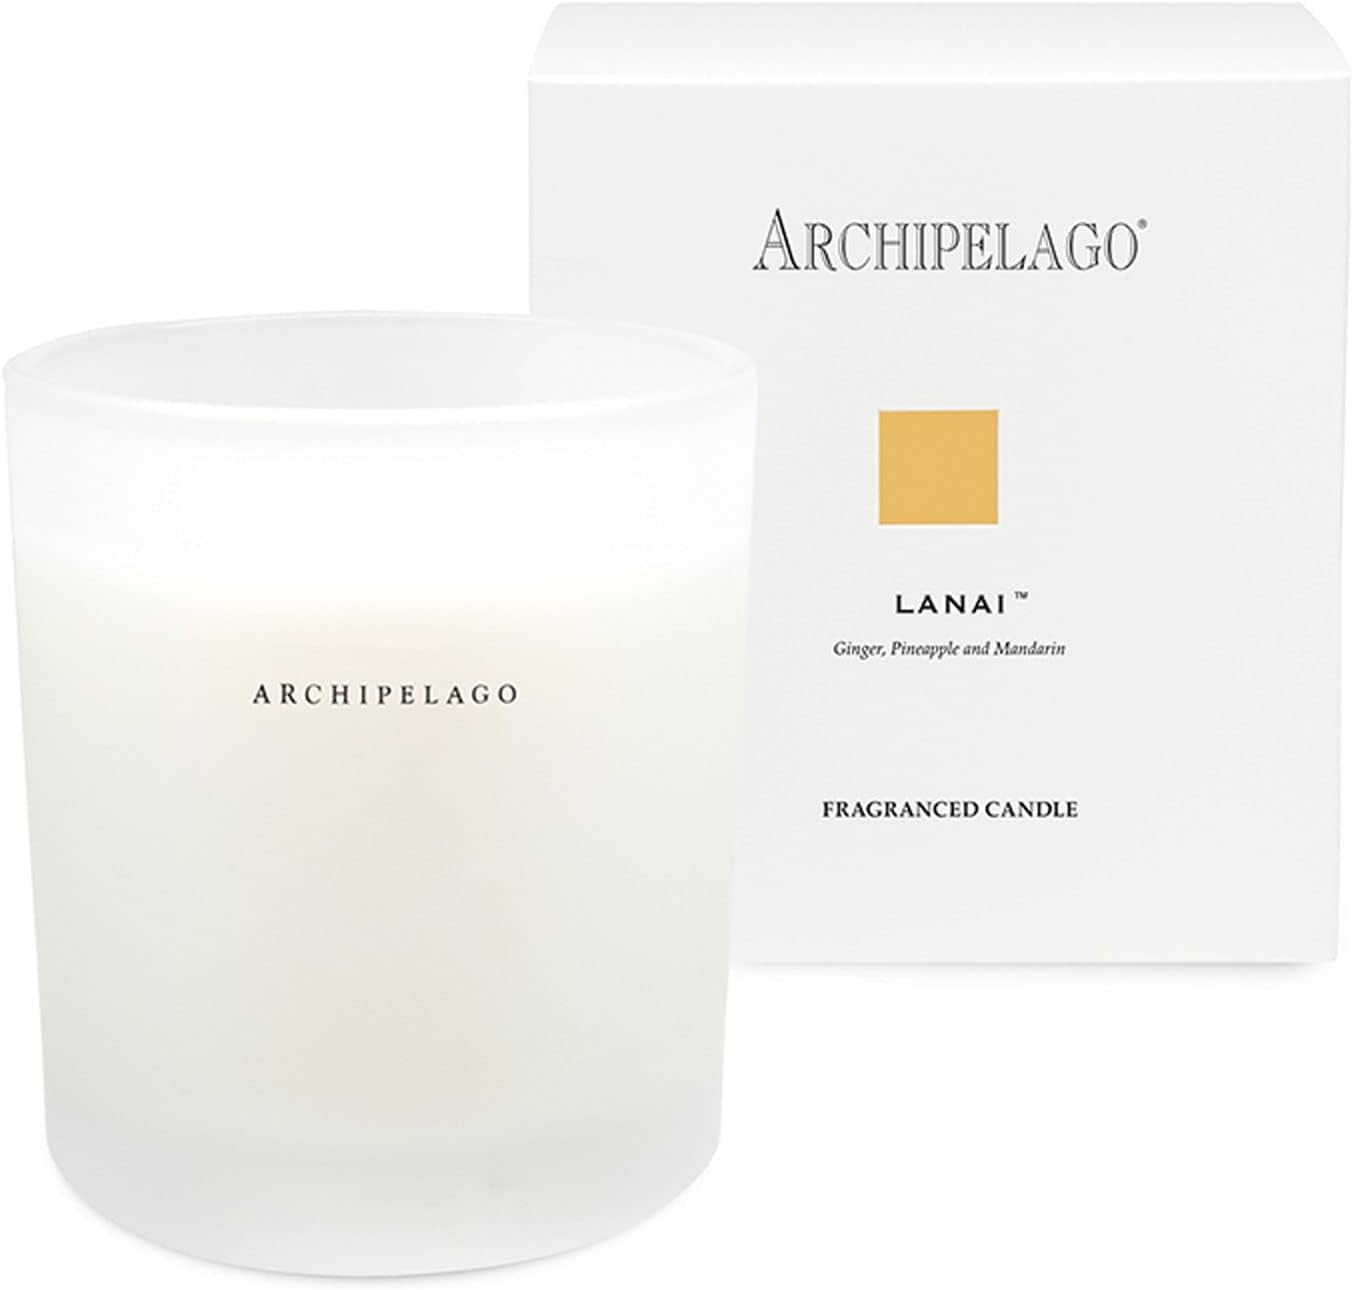 Archipelago Botanicals Lanai Boxed Candle. Alluring Scent of Pineapple, Mandarin and Ginger. Natural Coconut Wax Burns 60 Hours (10 oz)